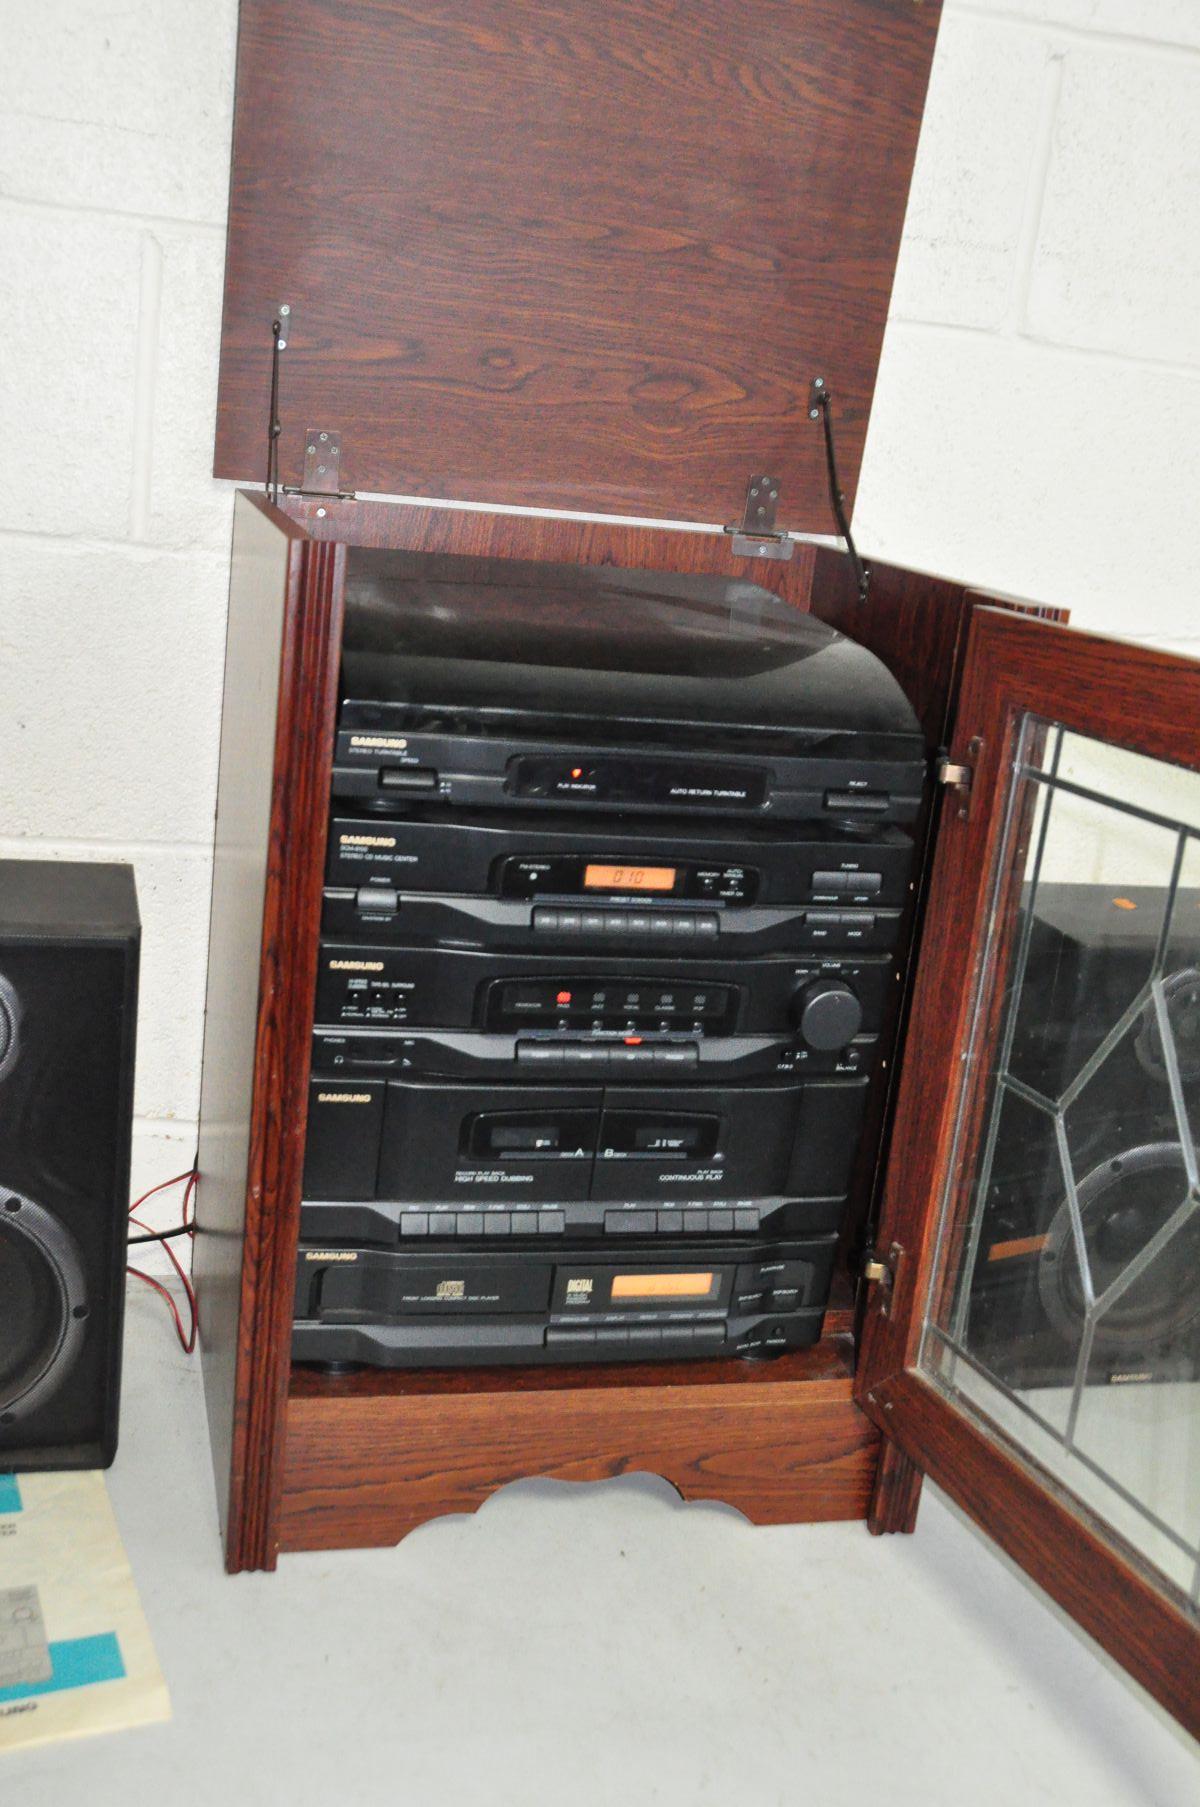 A SAMSUNG SCM 8100 HIFI in an oak cabinet together with two speakers (PAT pass and wowing but - Image 2 of 2